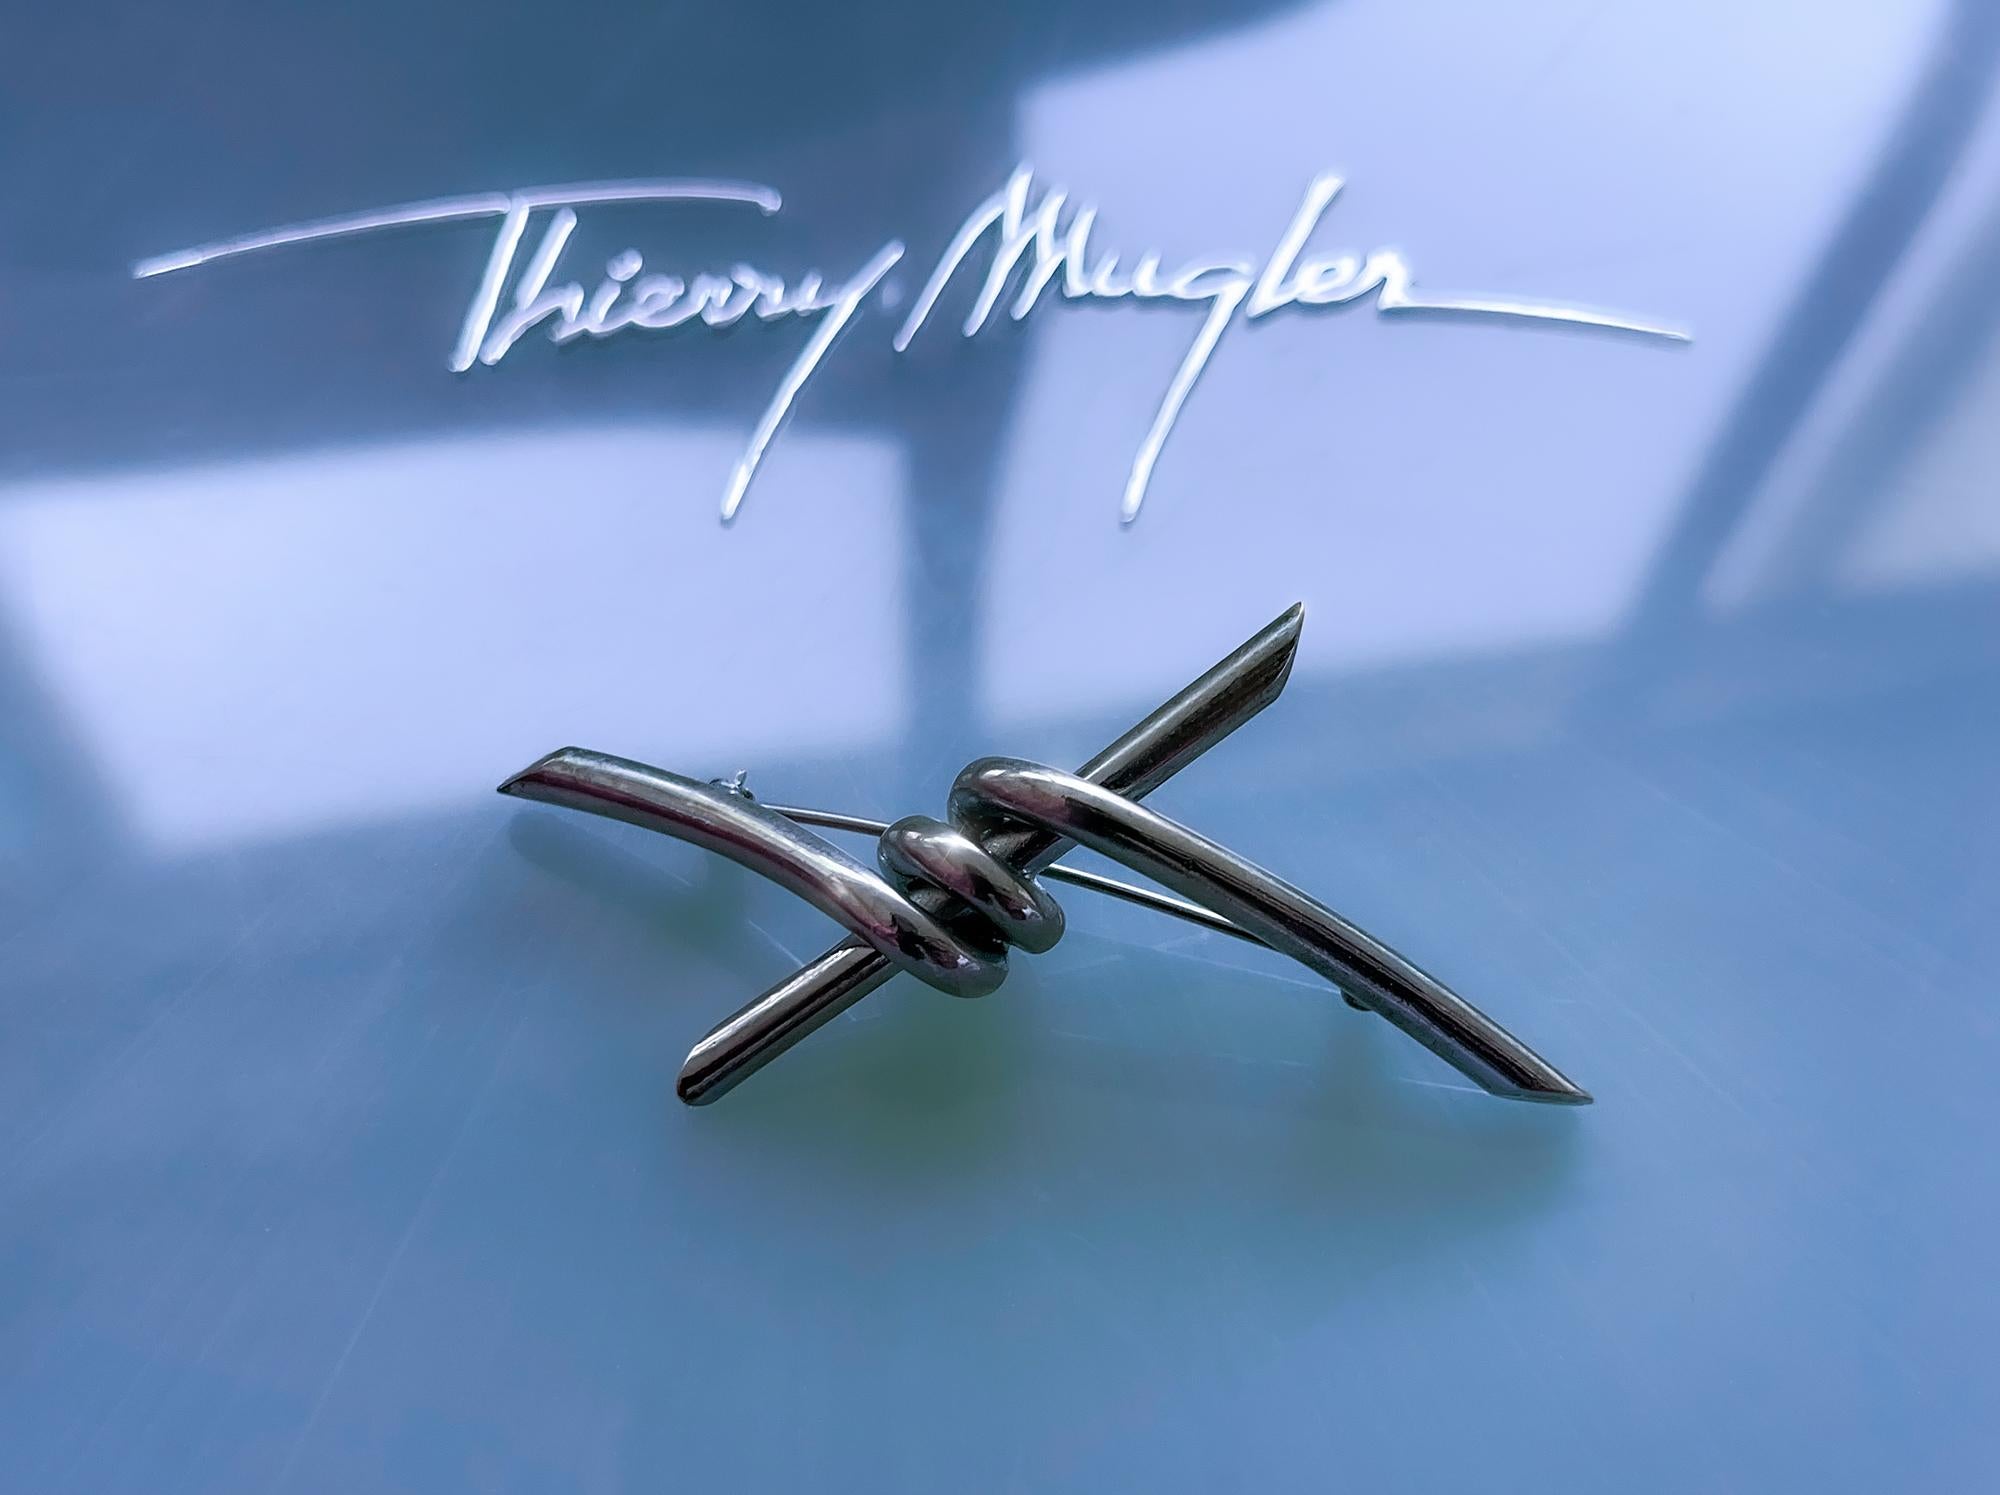 Thierry Mugler silver tone metal barbed wire brooch.

Thierry Mugler’s creations have always stood as iconic statements of bold innovation and avant-garde design. The extremely rare archival barbed wire brooch is a striking example of his